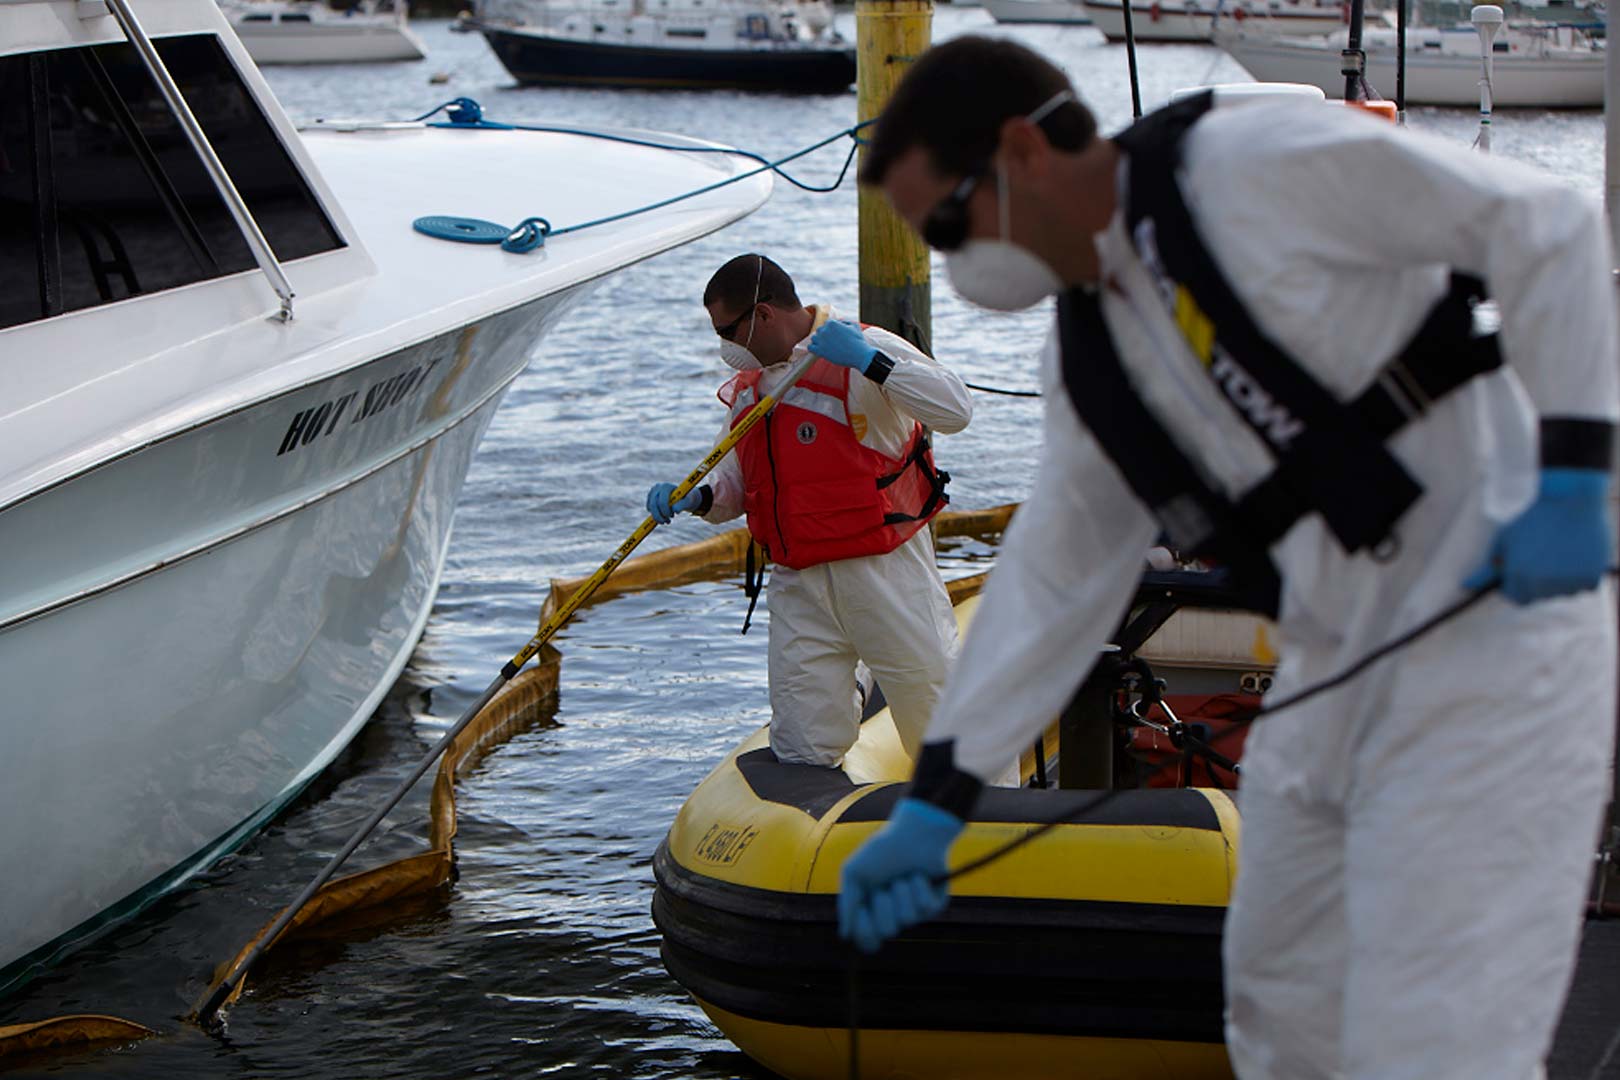 containing oil around a boat. Sea Tow focuses on environmental cleanup